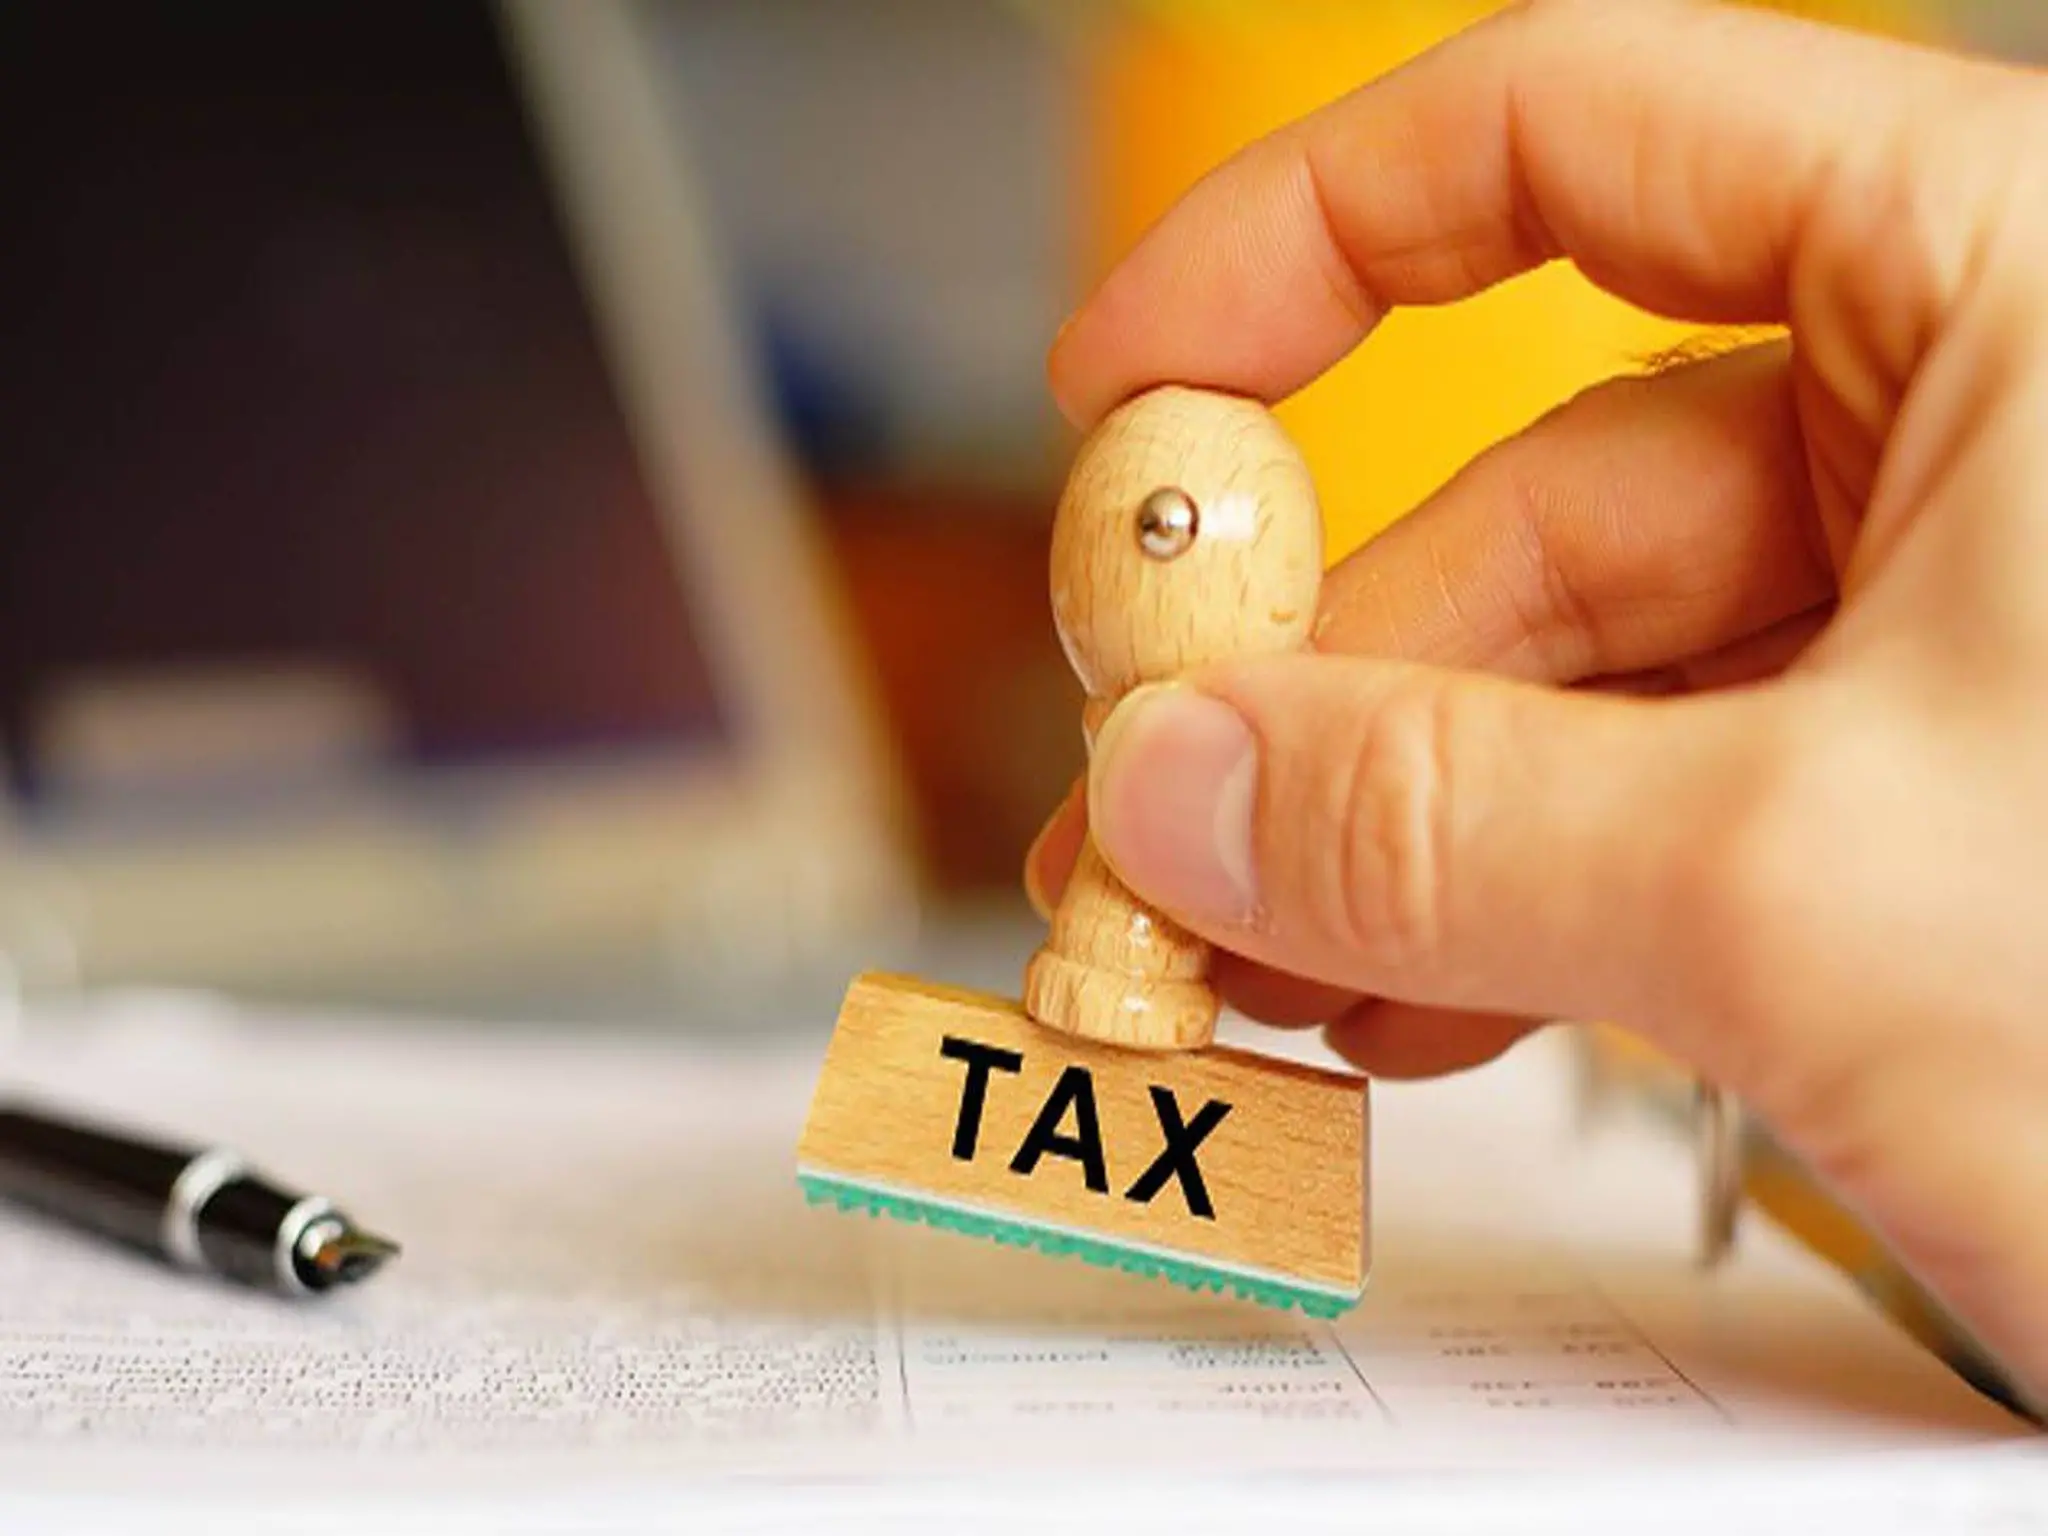 The UAE issues clarification regarding imposing income tax on individuals